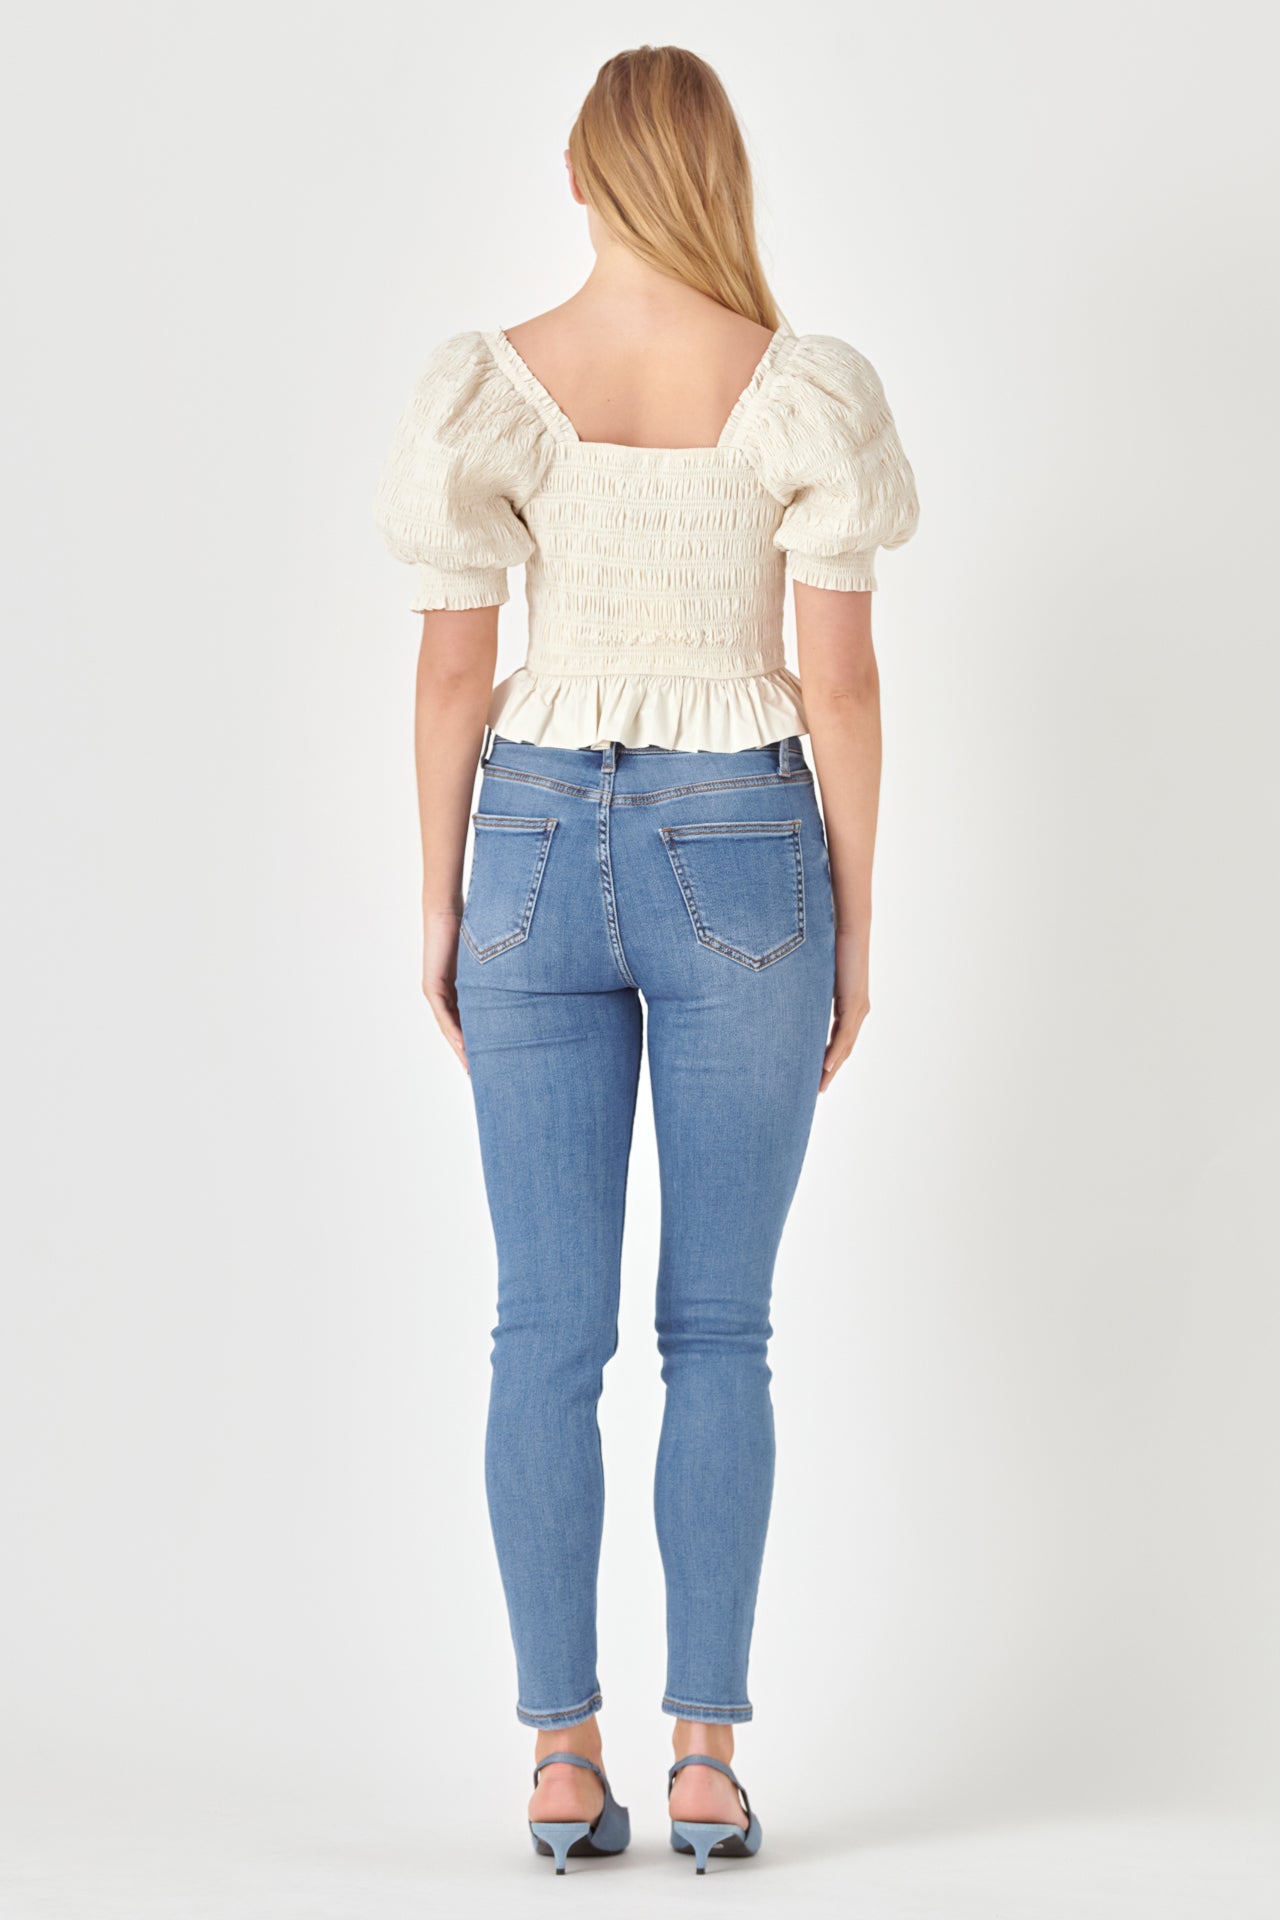 ENGLISH FACTORY - Smocked Puff Sleeve Top - TOPS available at Objectrare